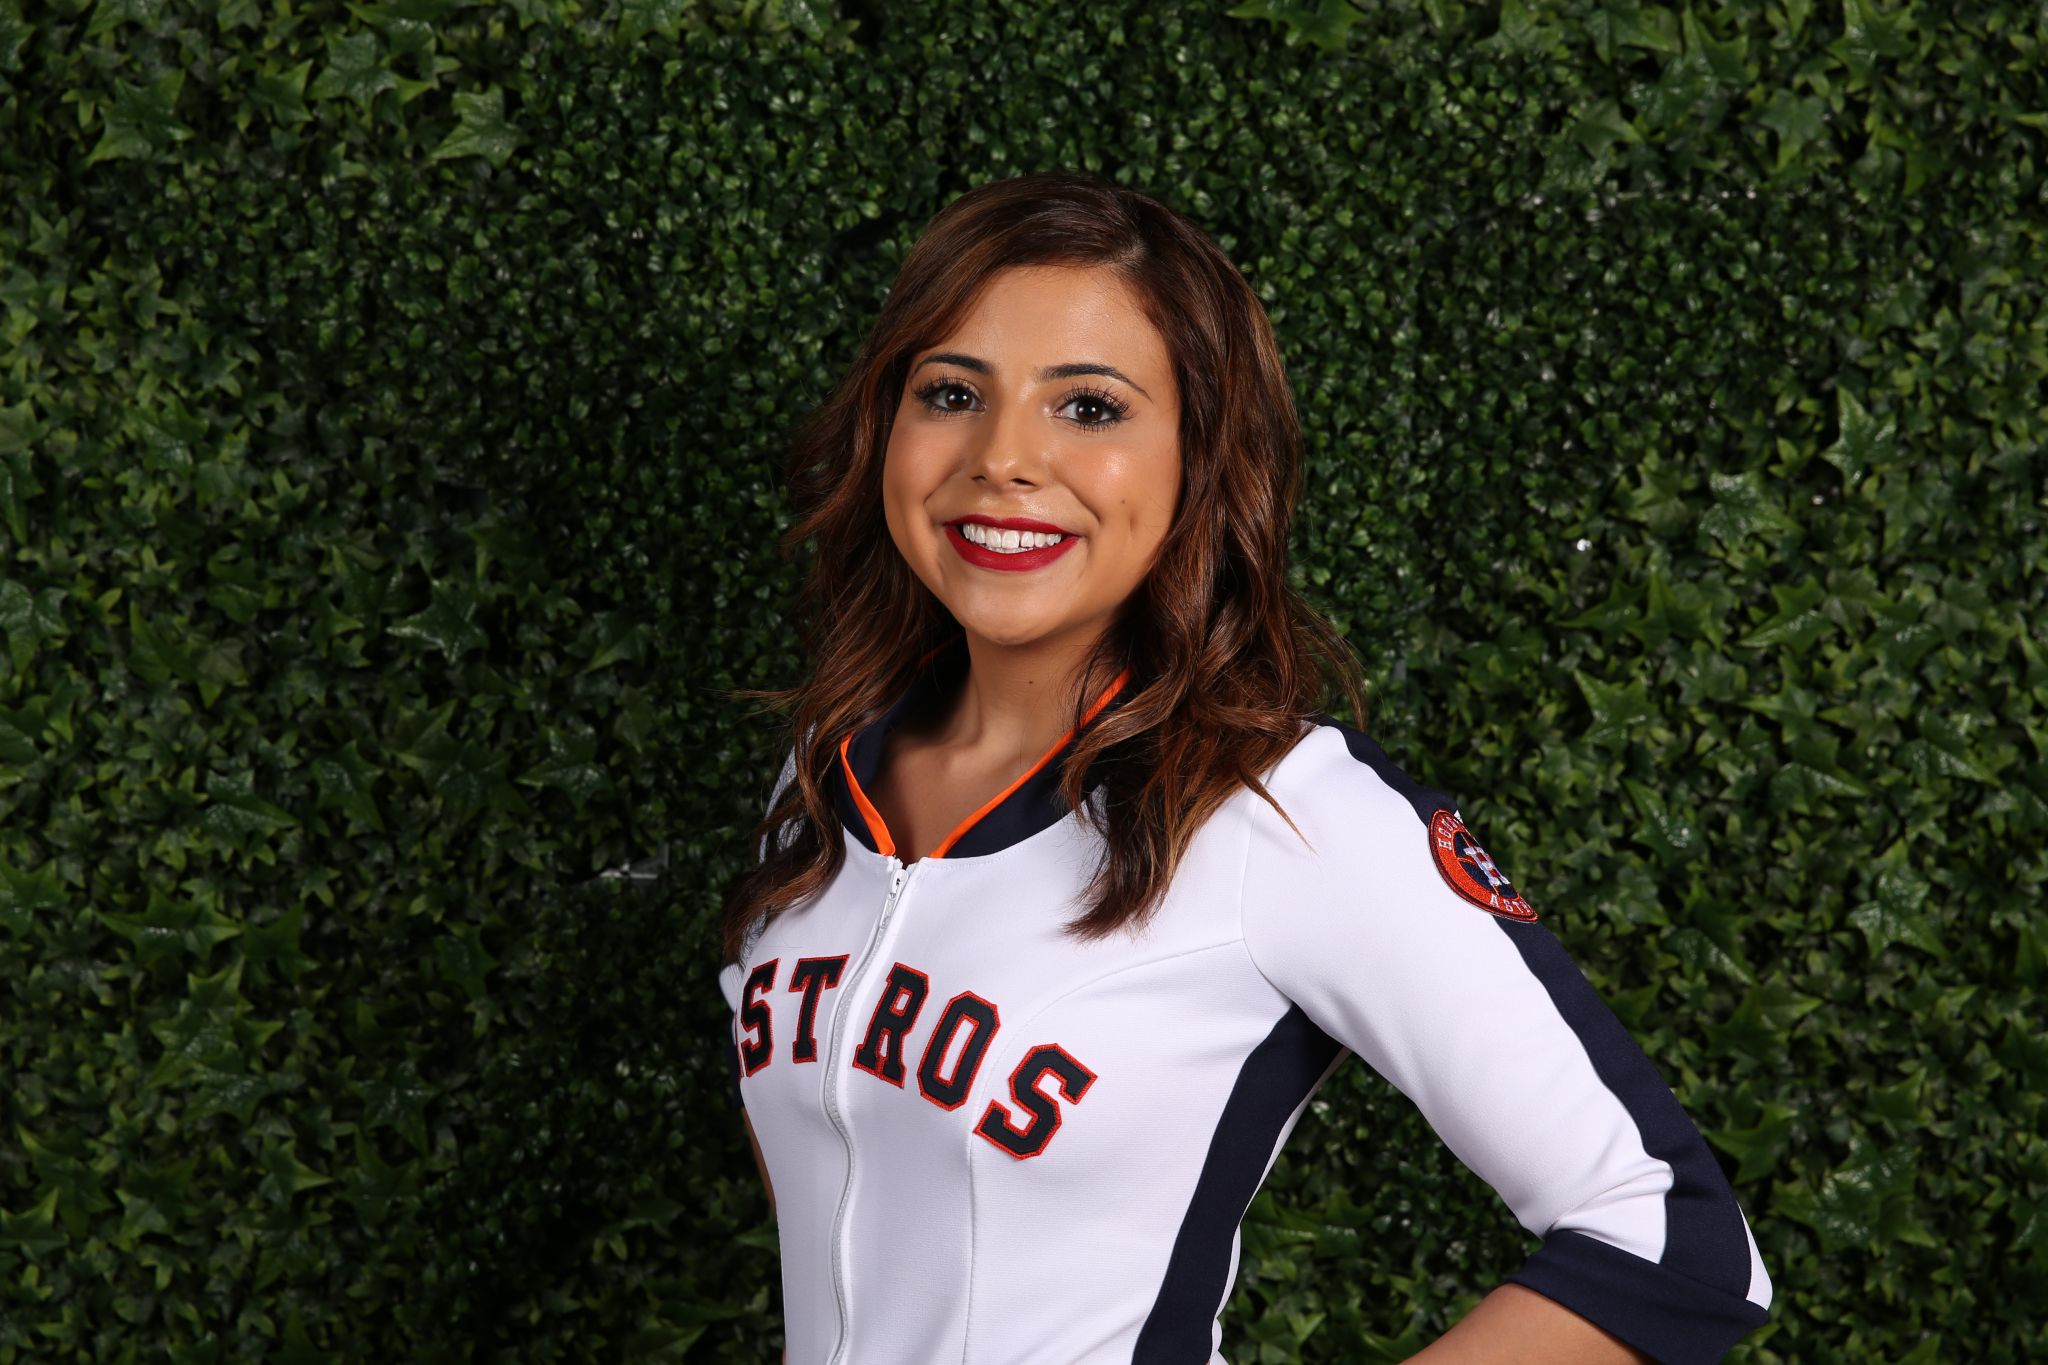 Astros Shooting Stars join Sally and Melissa at Minute Maid